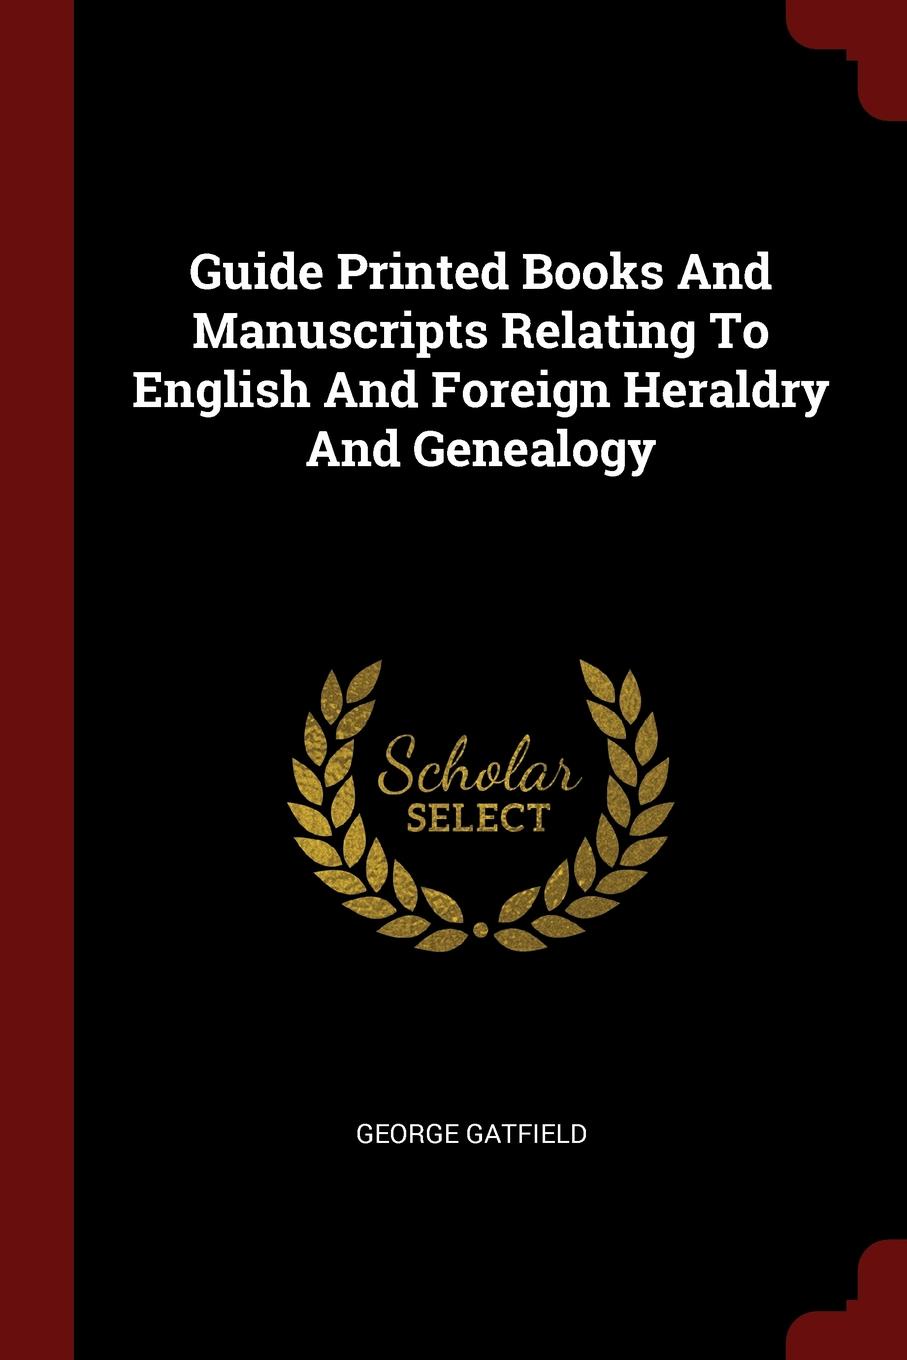 Guide Printed Books And Manuscripts Relating To English And Foreign Heraldry And Genealogy